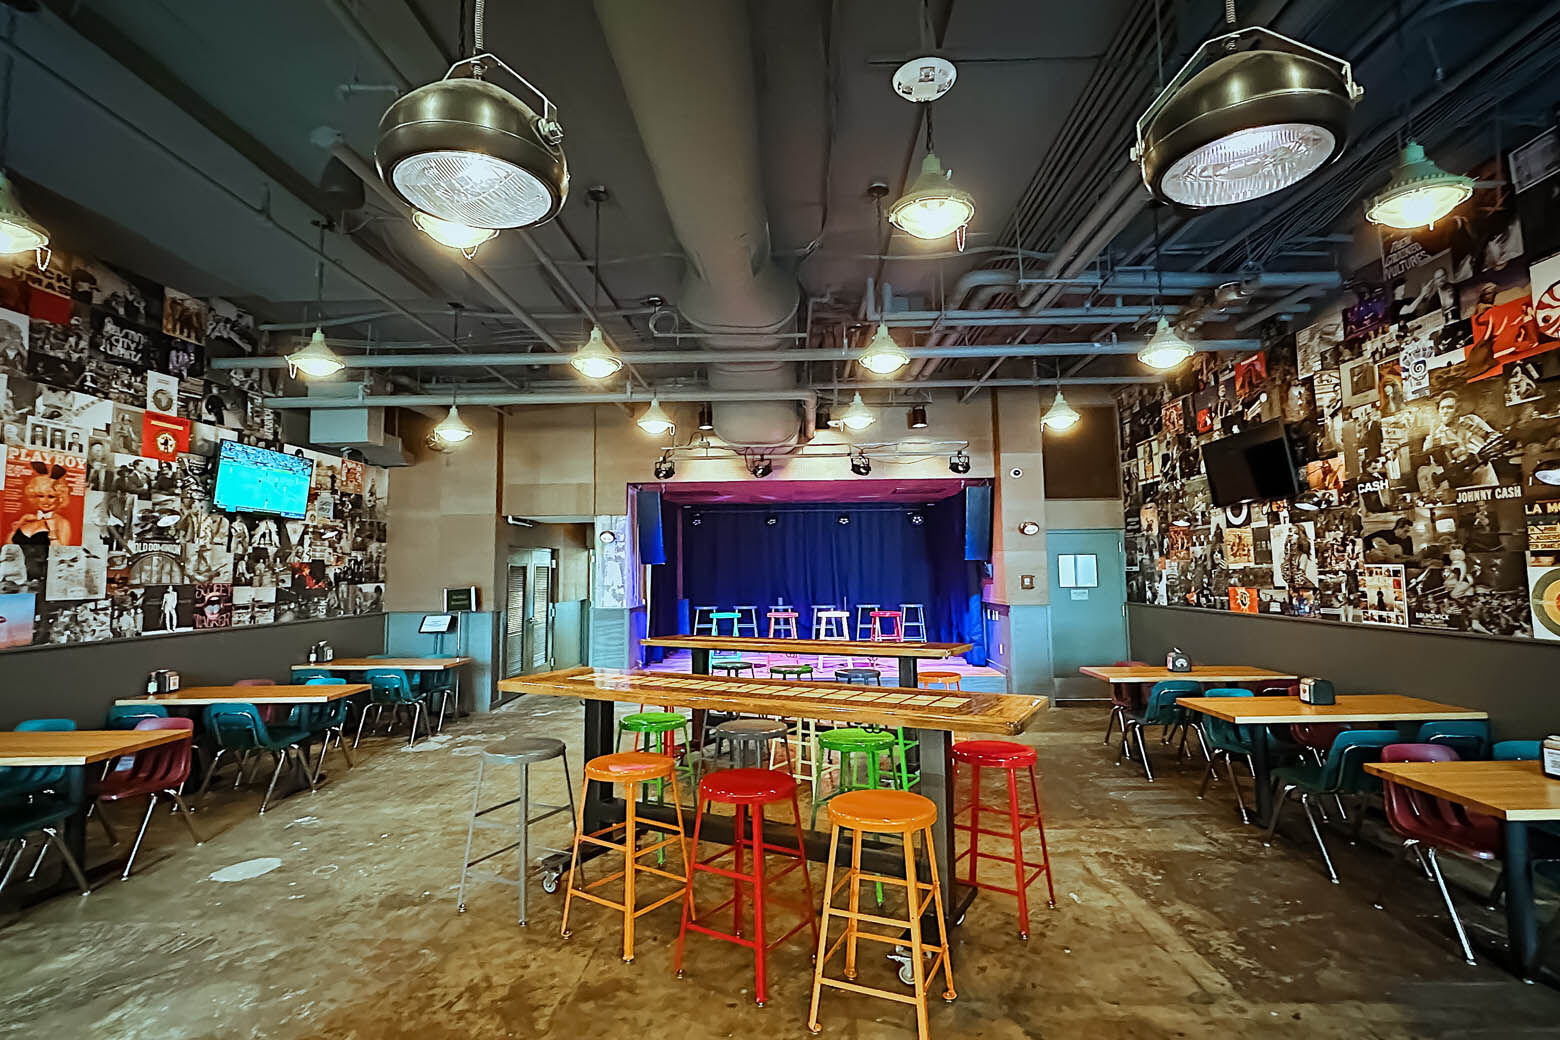 Mexican restaurant El Rey debuts its live performance venue The Filling Station on Aug.11.